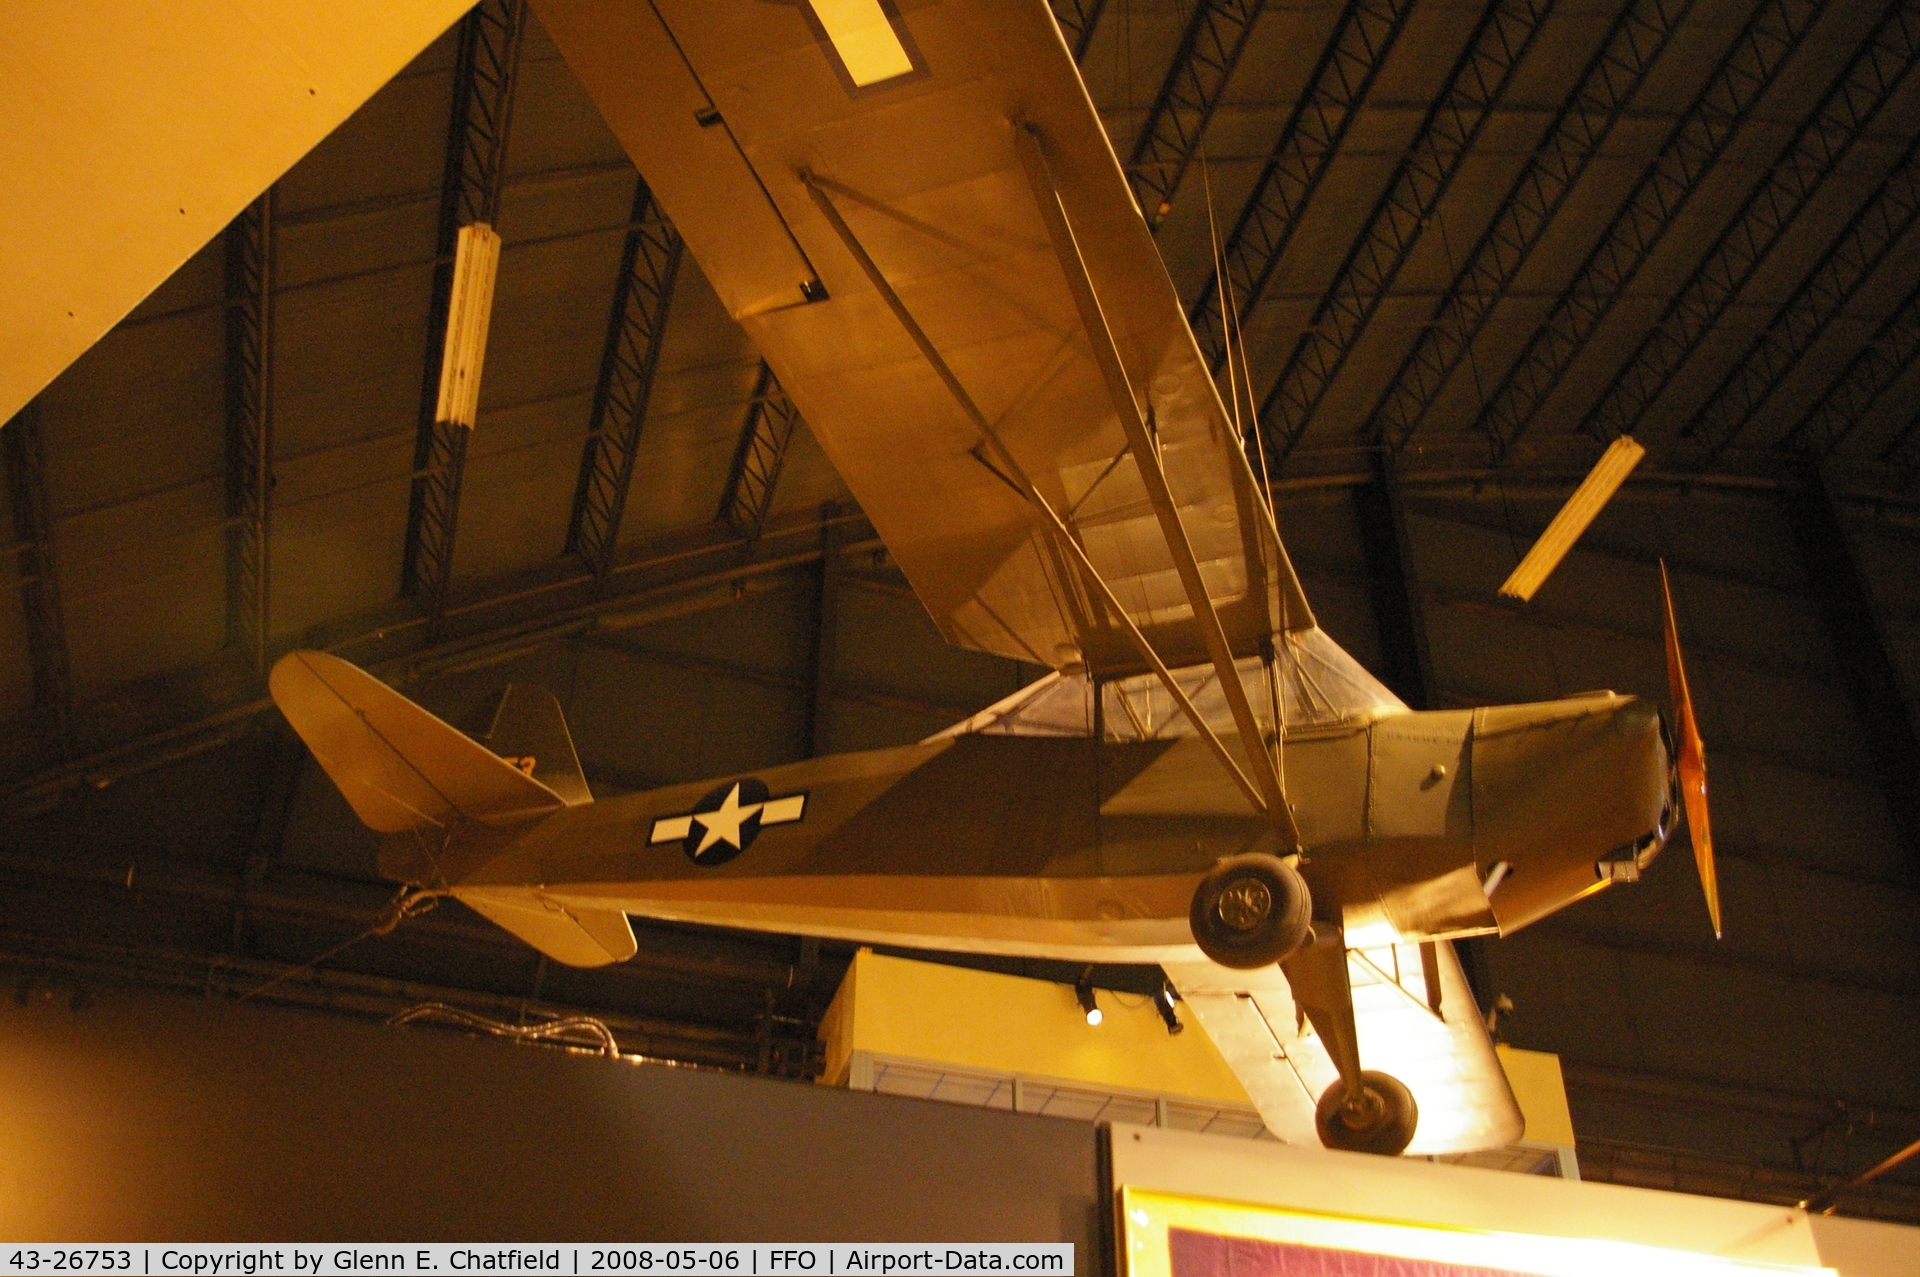 43-26753, 1943 Taylorcraft L-2M Grasshopper C/N L-6065?, Hanging from the ceiling in the National Museum of the U.S. Air Force